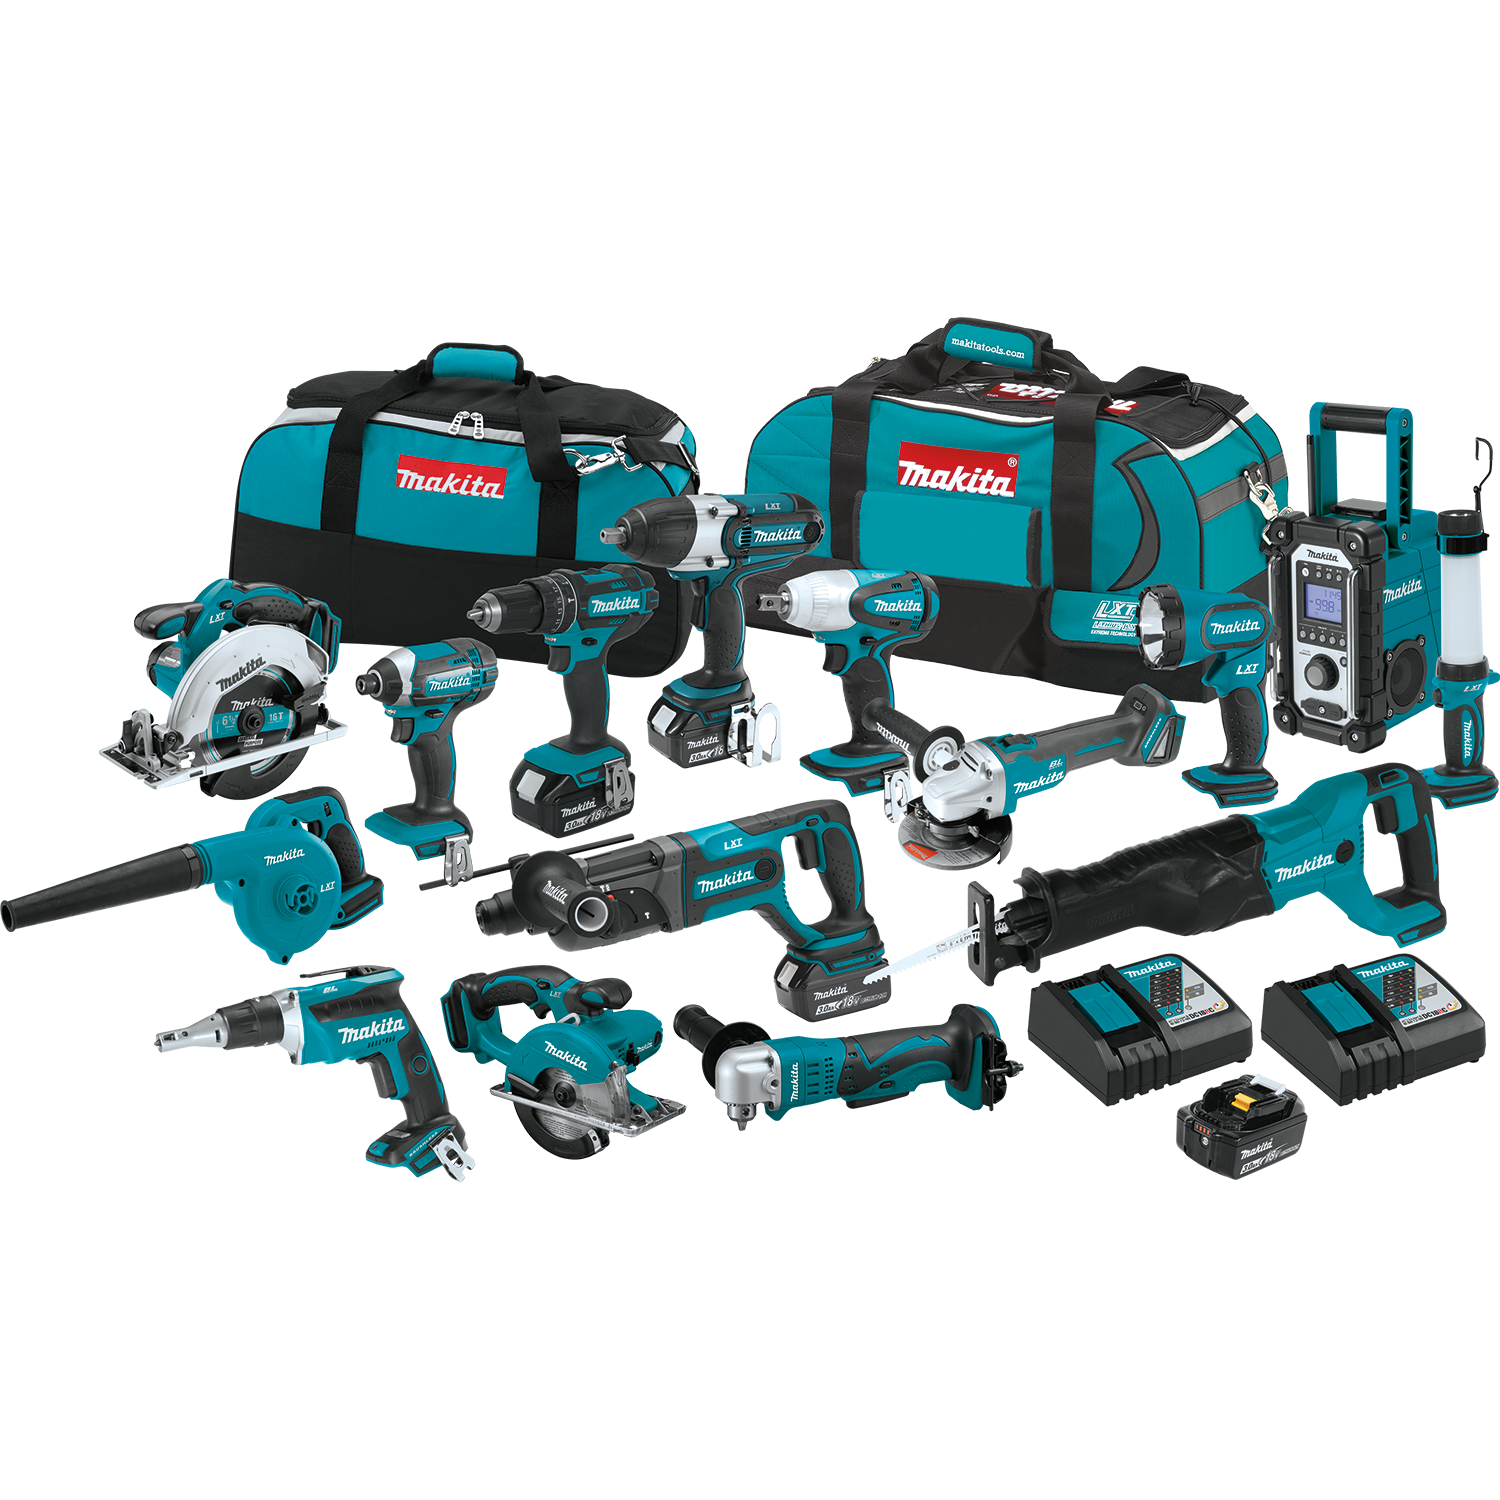 Makita XSC01Z 18V LXT Lithium-Ion Cordless 5-3 8" Metal Cutting Saw, Tool Only - 4